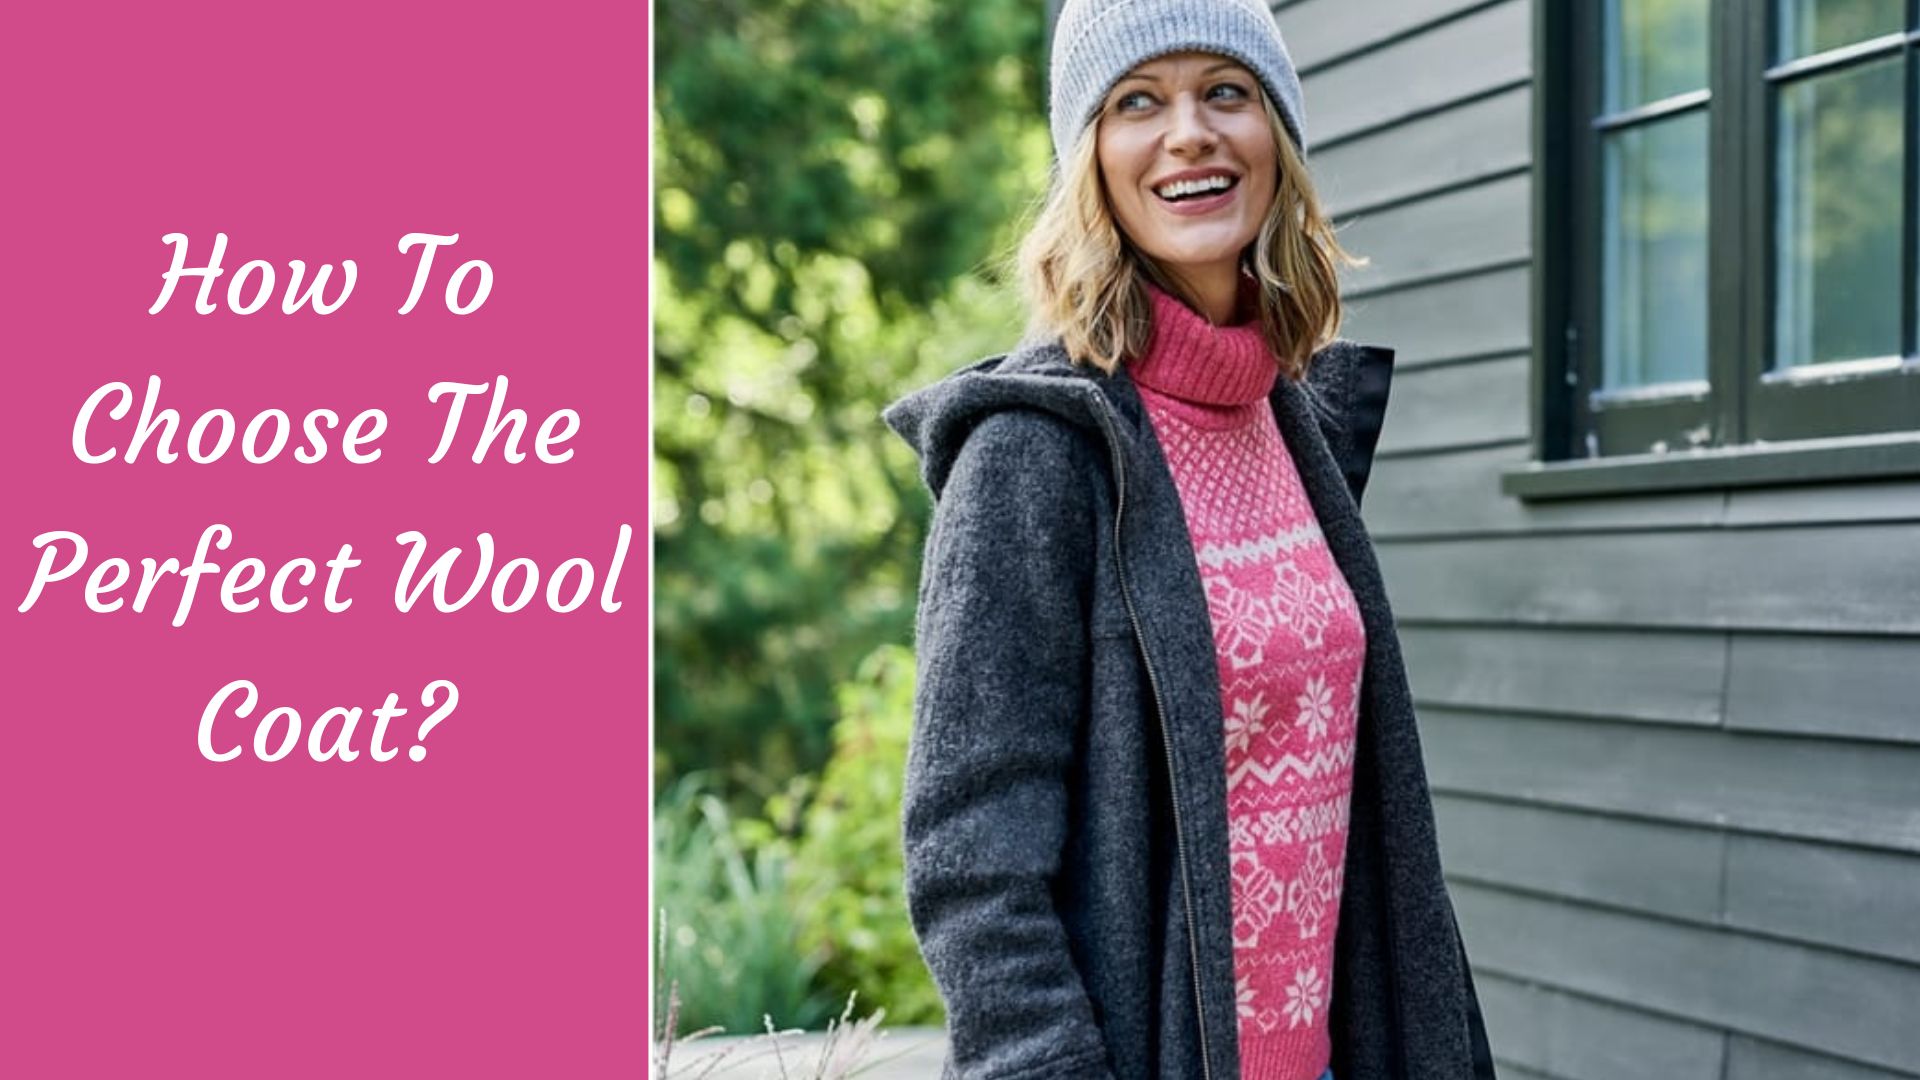 How To Choose The Perfect Wool Coat?